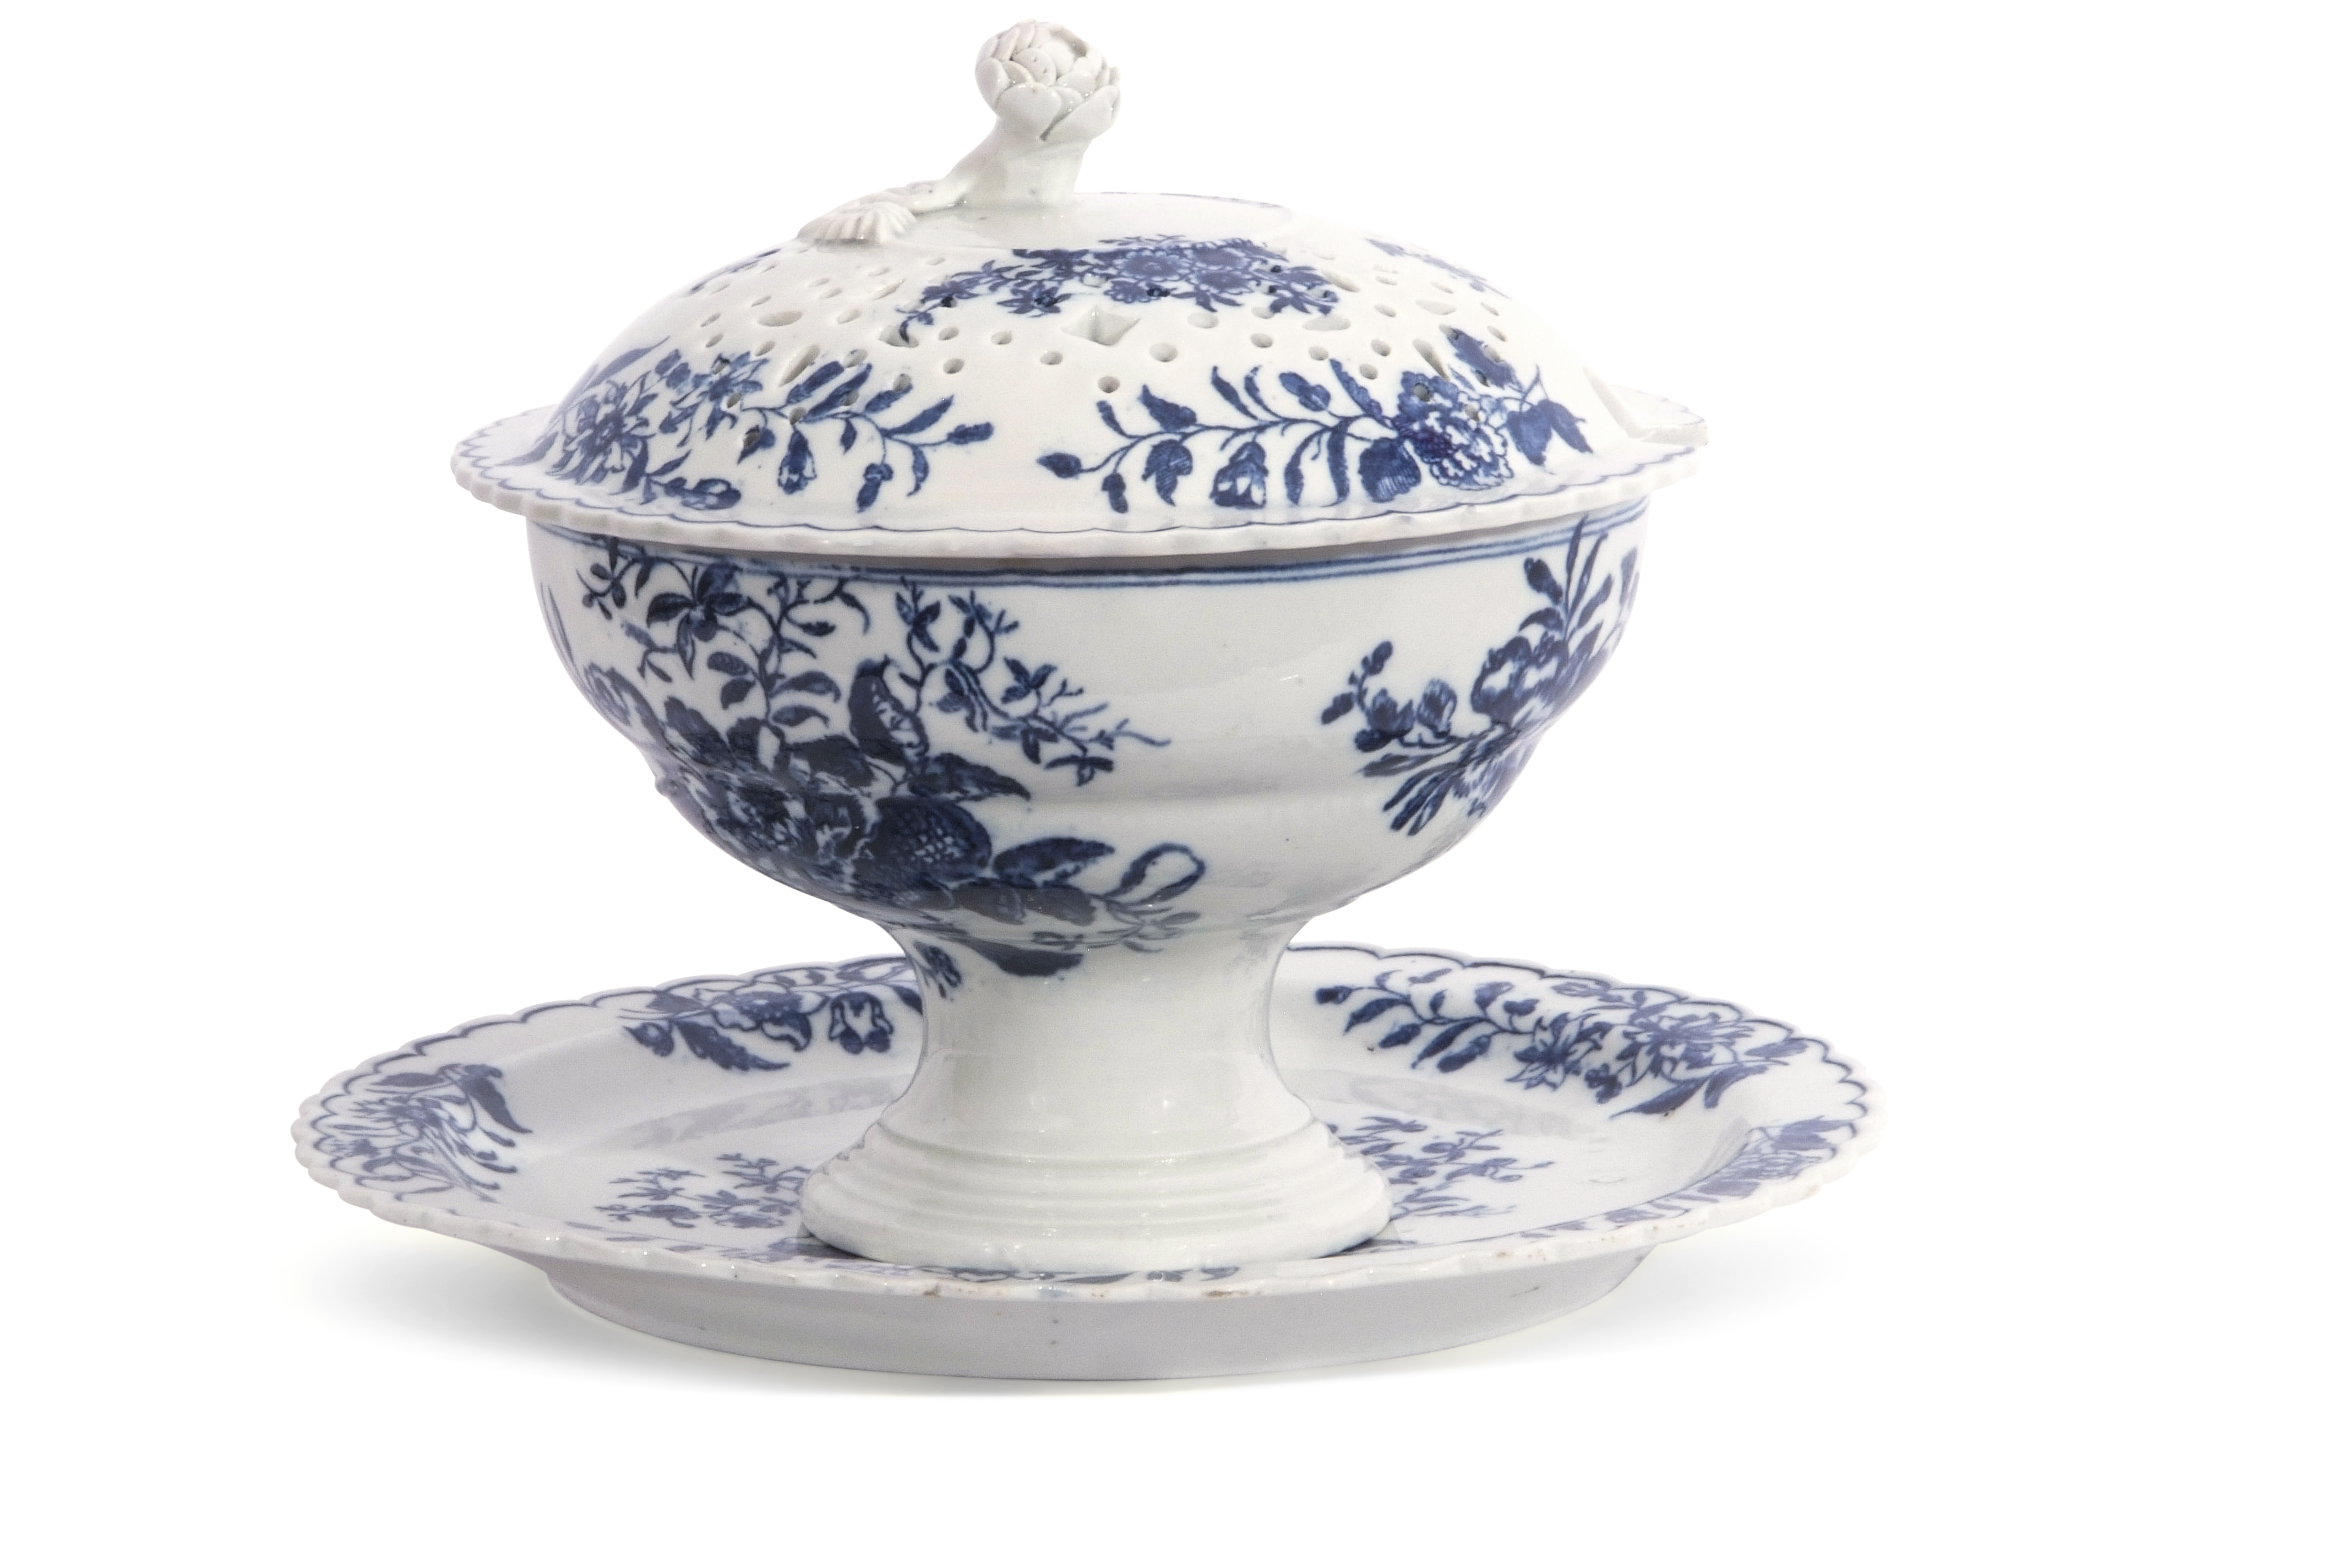 Lowestoft porcelain rice bowl, cover and stand, or small dessert tureen, decorated with the pine